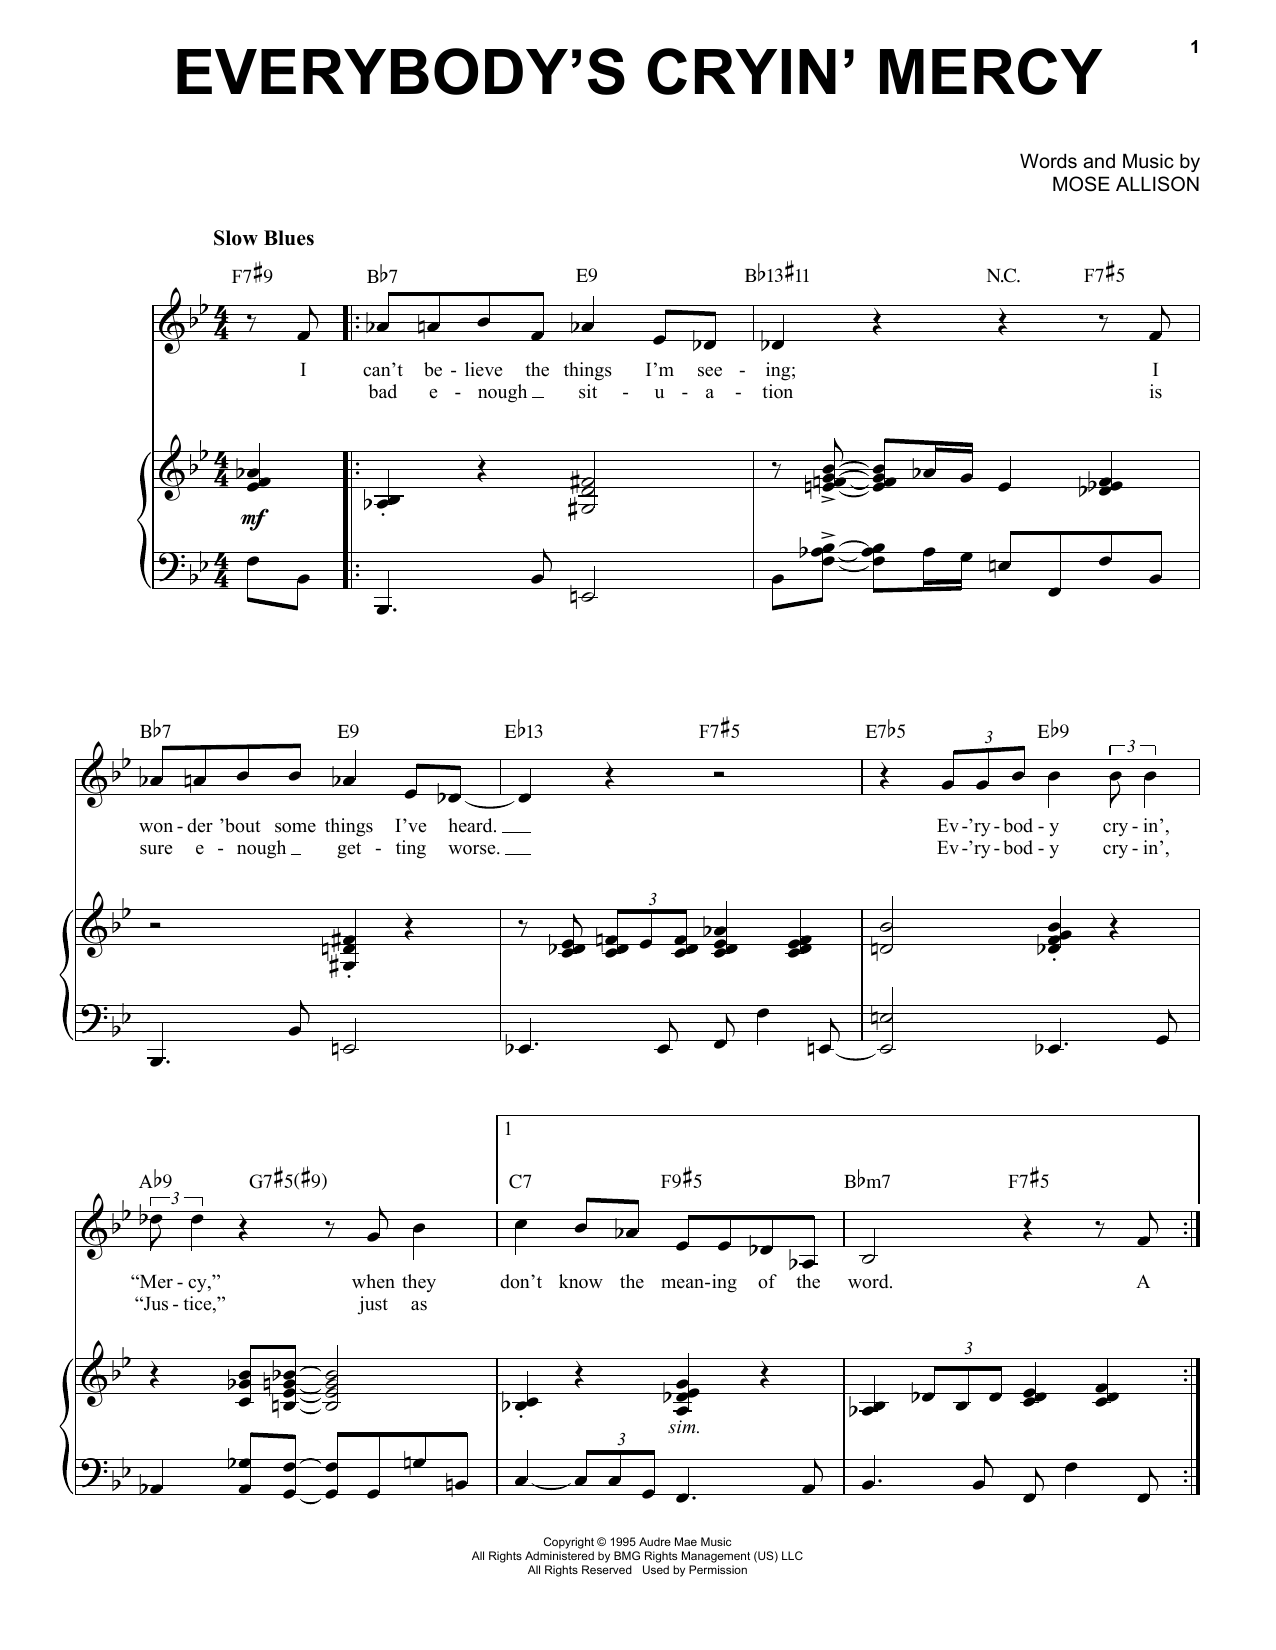 Download Mose Allison Everybody's Cryin' Mercy Sheet Music